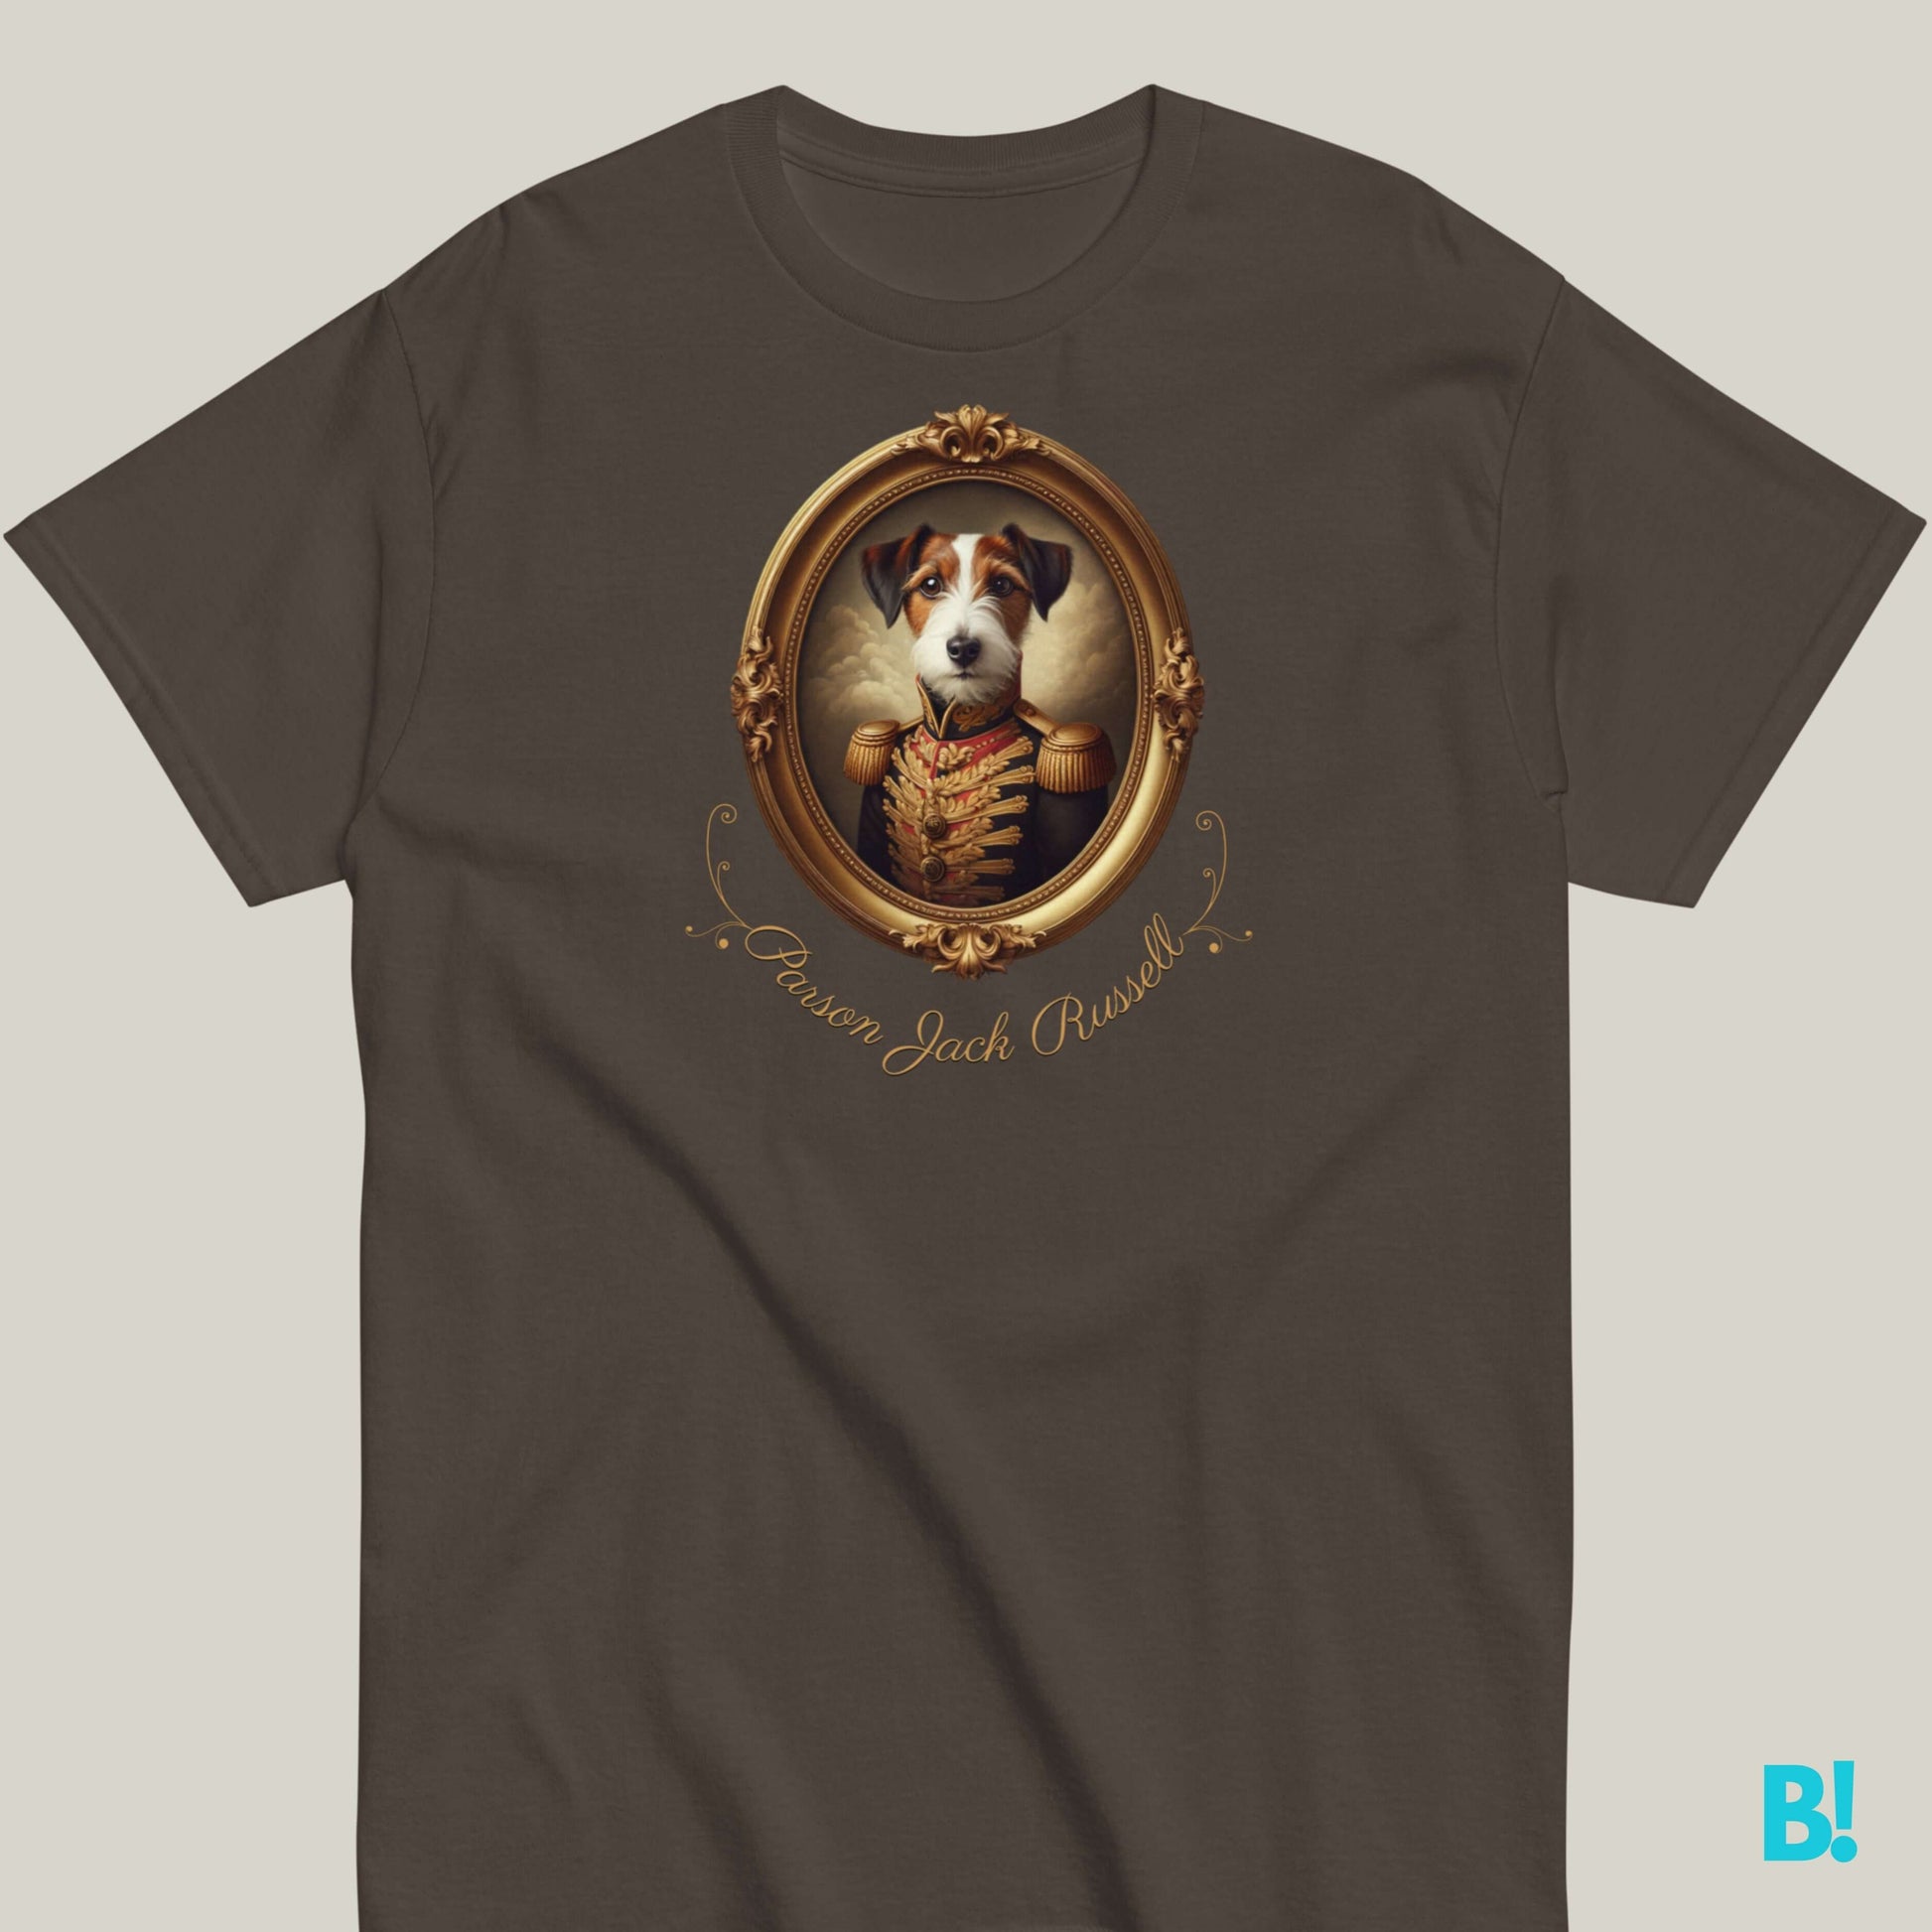 Parson Jack Russell Tee - Agility Inspired Portraits Don our Parson Jack Russell tee, with baroque charm in 7 colors. Pure cotton comfort meets agility spirit. Shop your perfect fit now! €29.50 B!NKY Comfywear